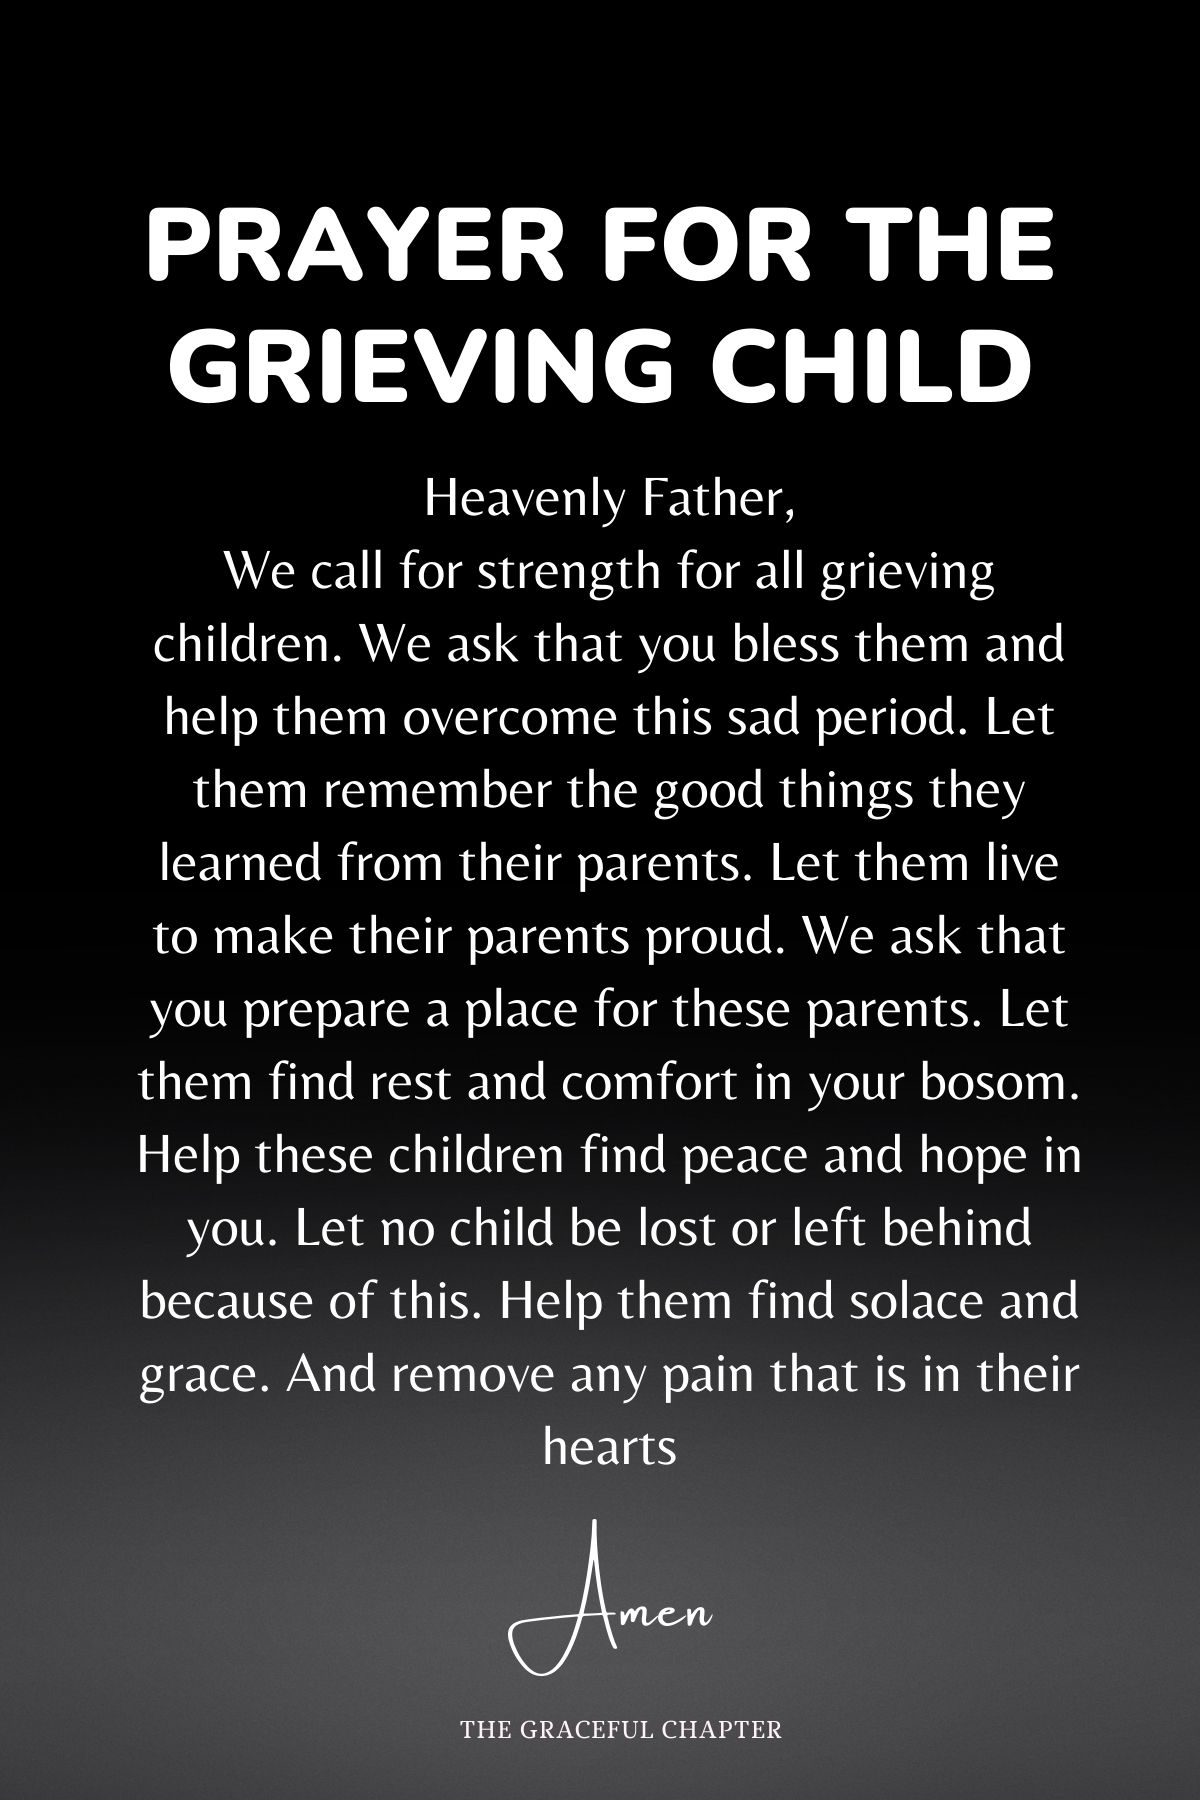 Prayer for the grieving child